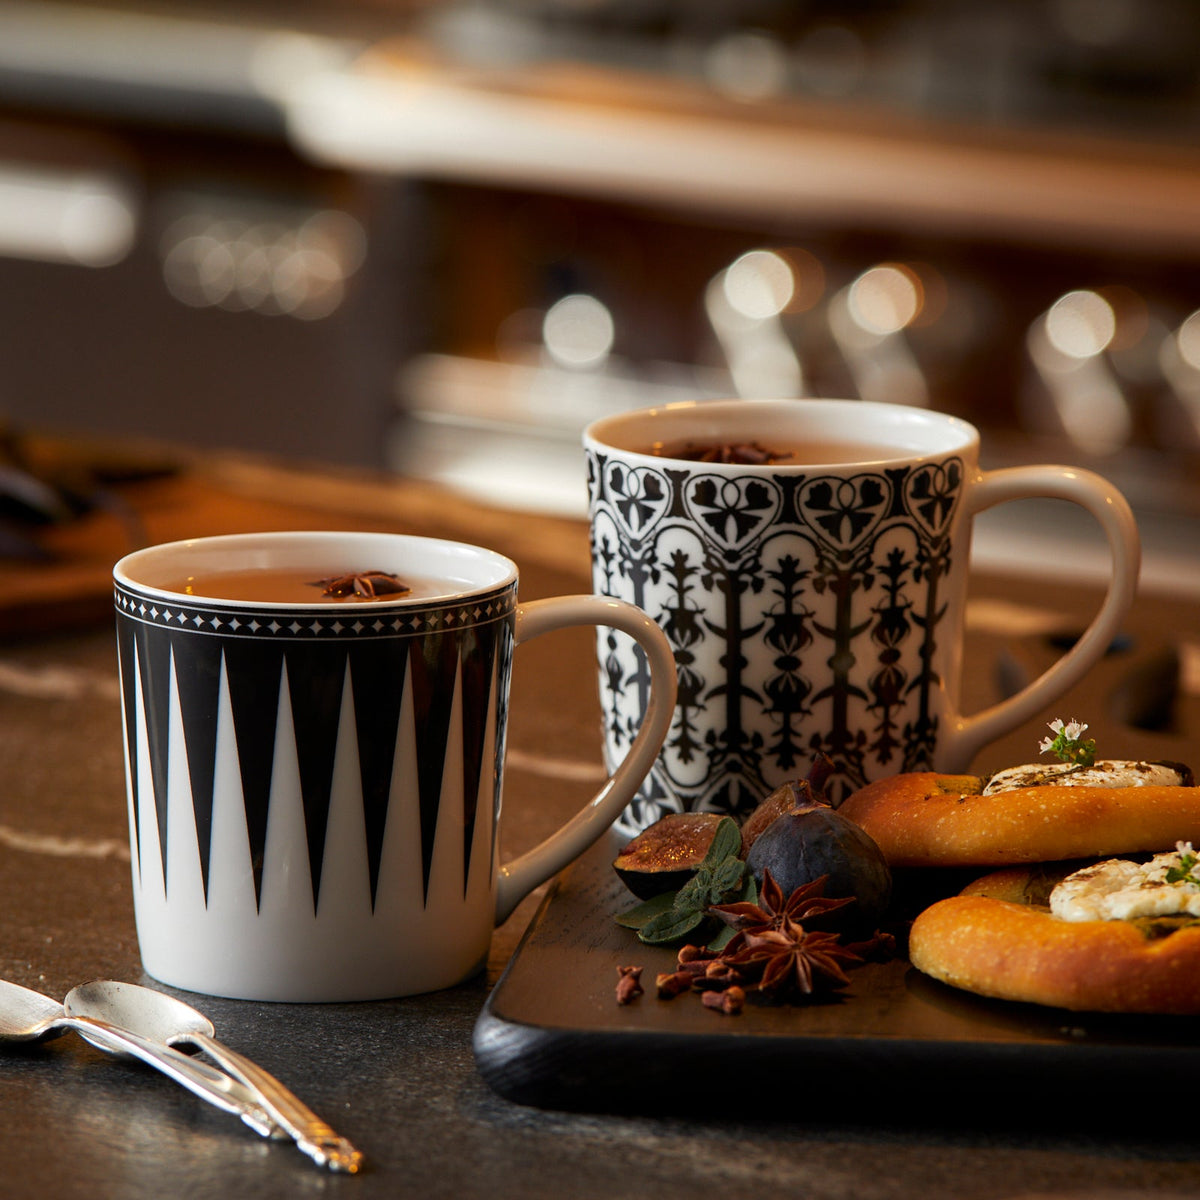 Two patterned mugs filled with hot beverages sit on a table next to a plate of biscuits garnished with herbs. Hand decorated dinnerware, including Caskata Artisanal Home&#39;s Casablanca Mug, adds a touch of elegance. A spoon is placed beside the mugs. The background features an out-of-focus kitchen.